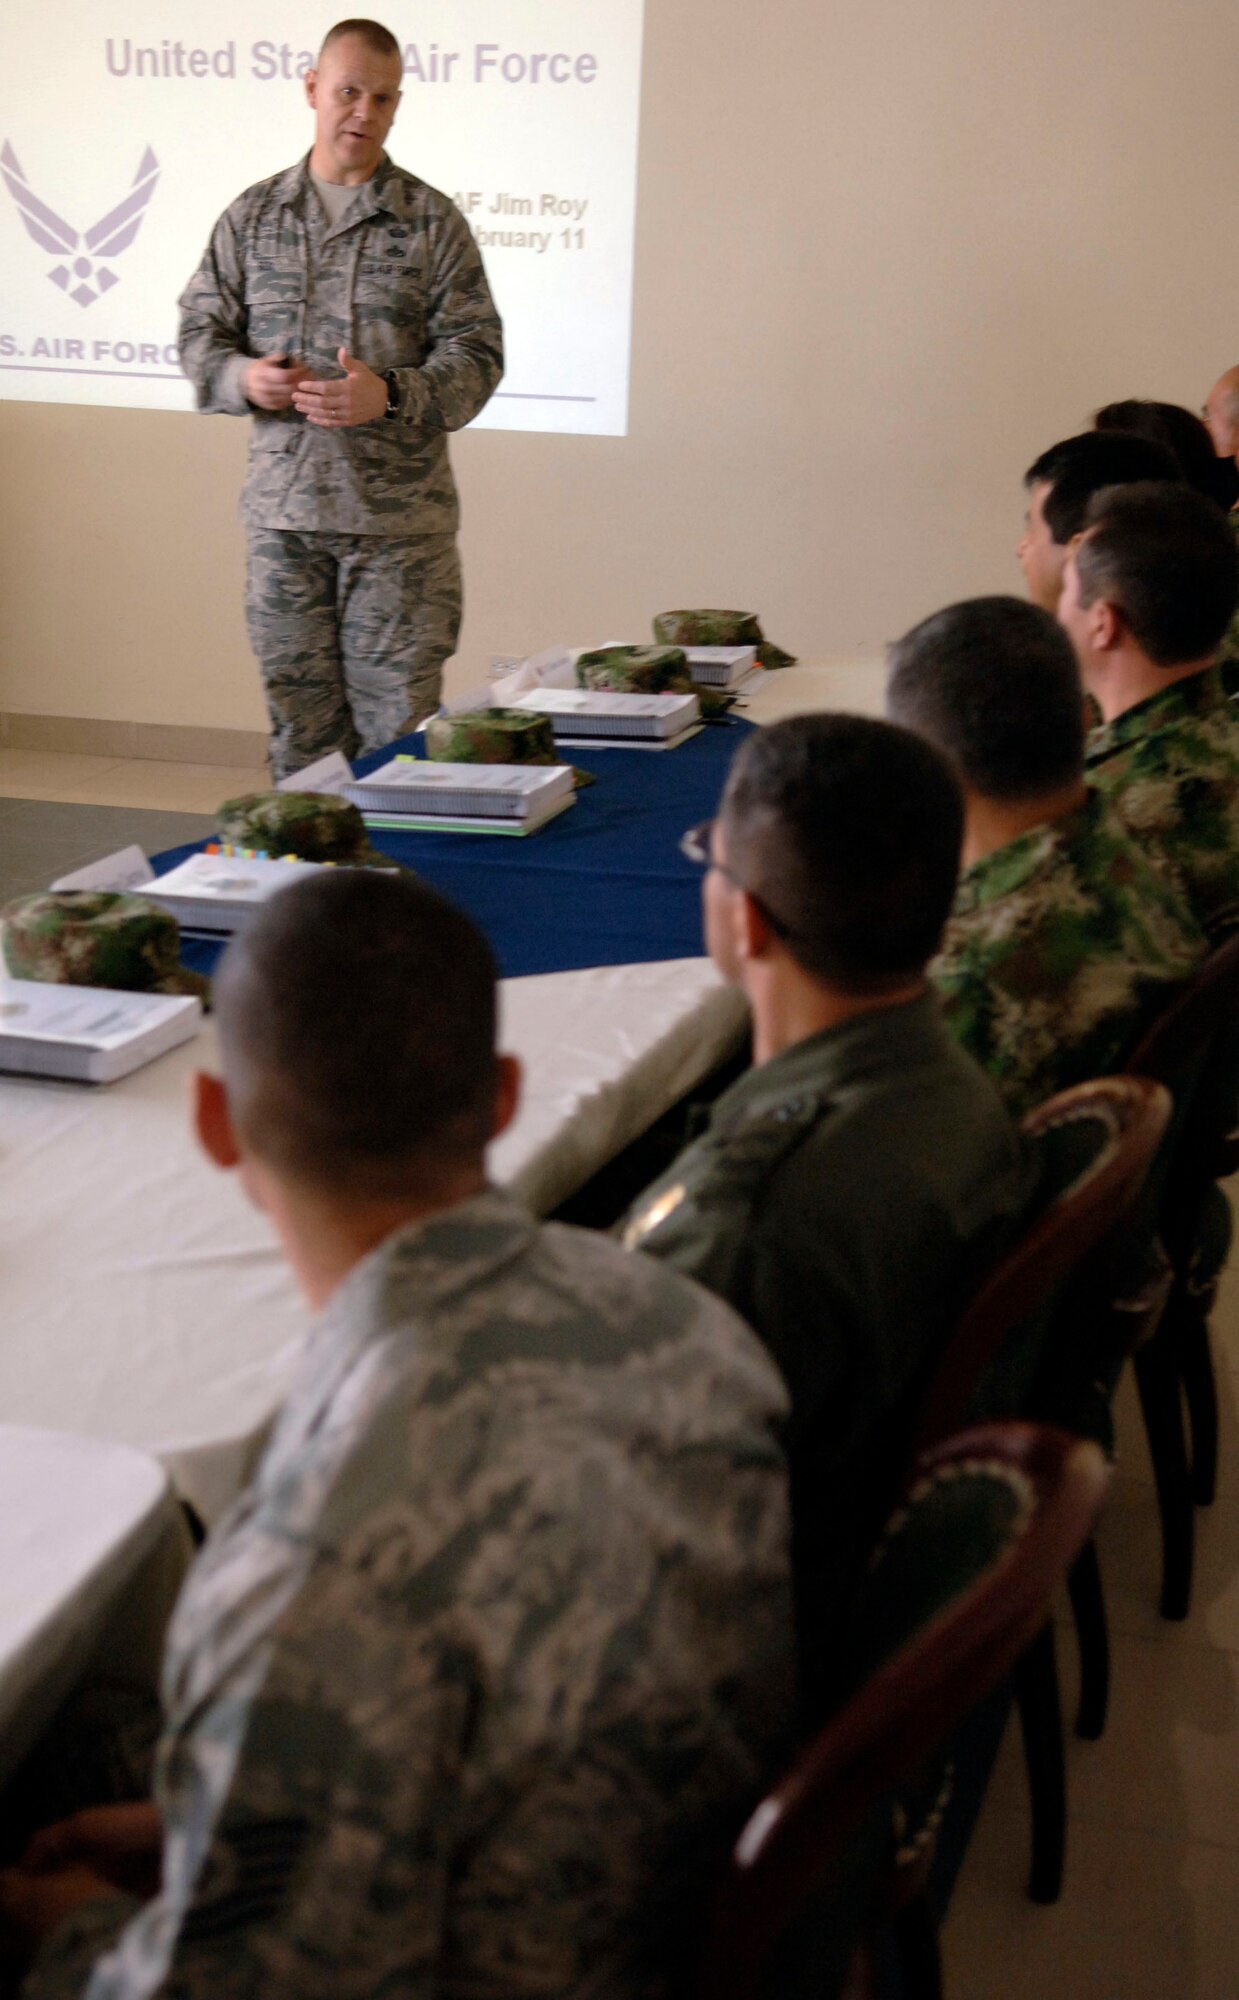 BOGOTA, Colombia -- Chief Master Sgt. of the Air Force James Roy discusses the duties of noncommissioned officers with students of the International NCO Academy Feb. 2. The INCOA is a combined professional military education course. Chief Roy's visit focused on strengthening relationships between U.S. and Columbian Airmen. (U.S. Air Force photo/Tech. Sgt. Eric Petosky)